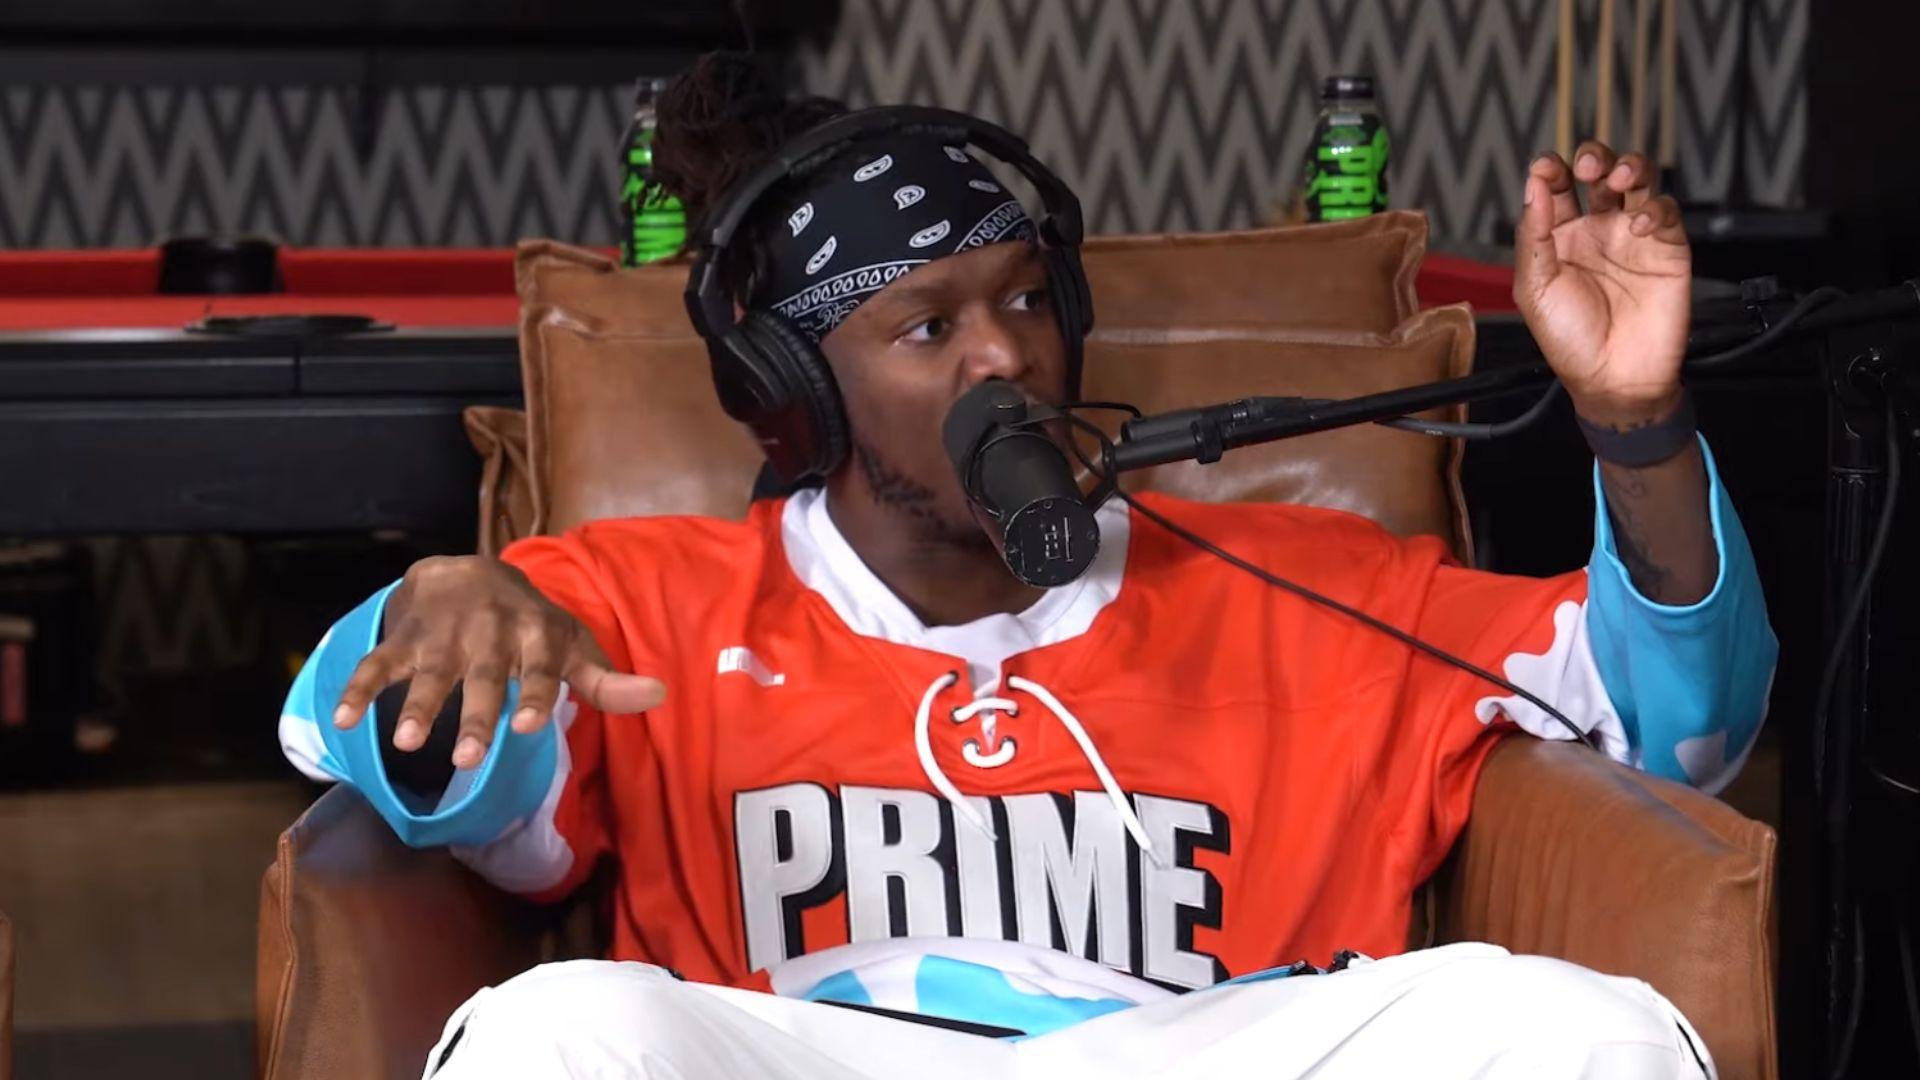 KSI in red and blue prime hockey jersey talking into microphone